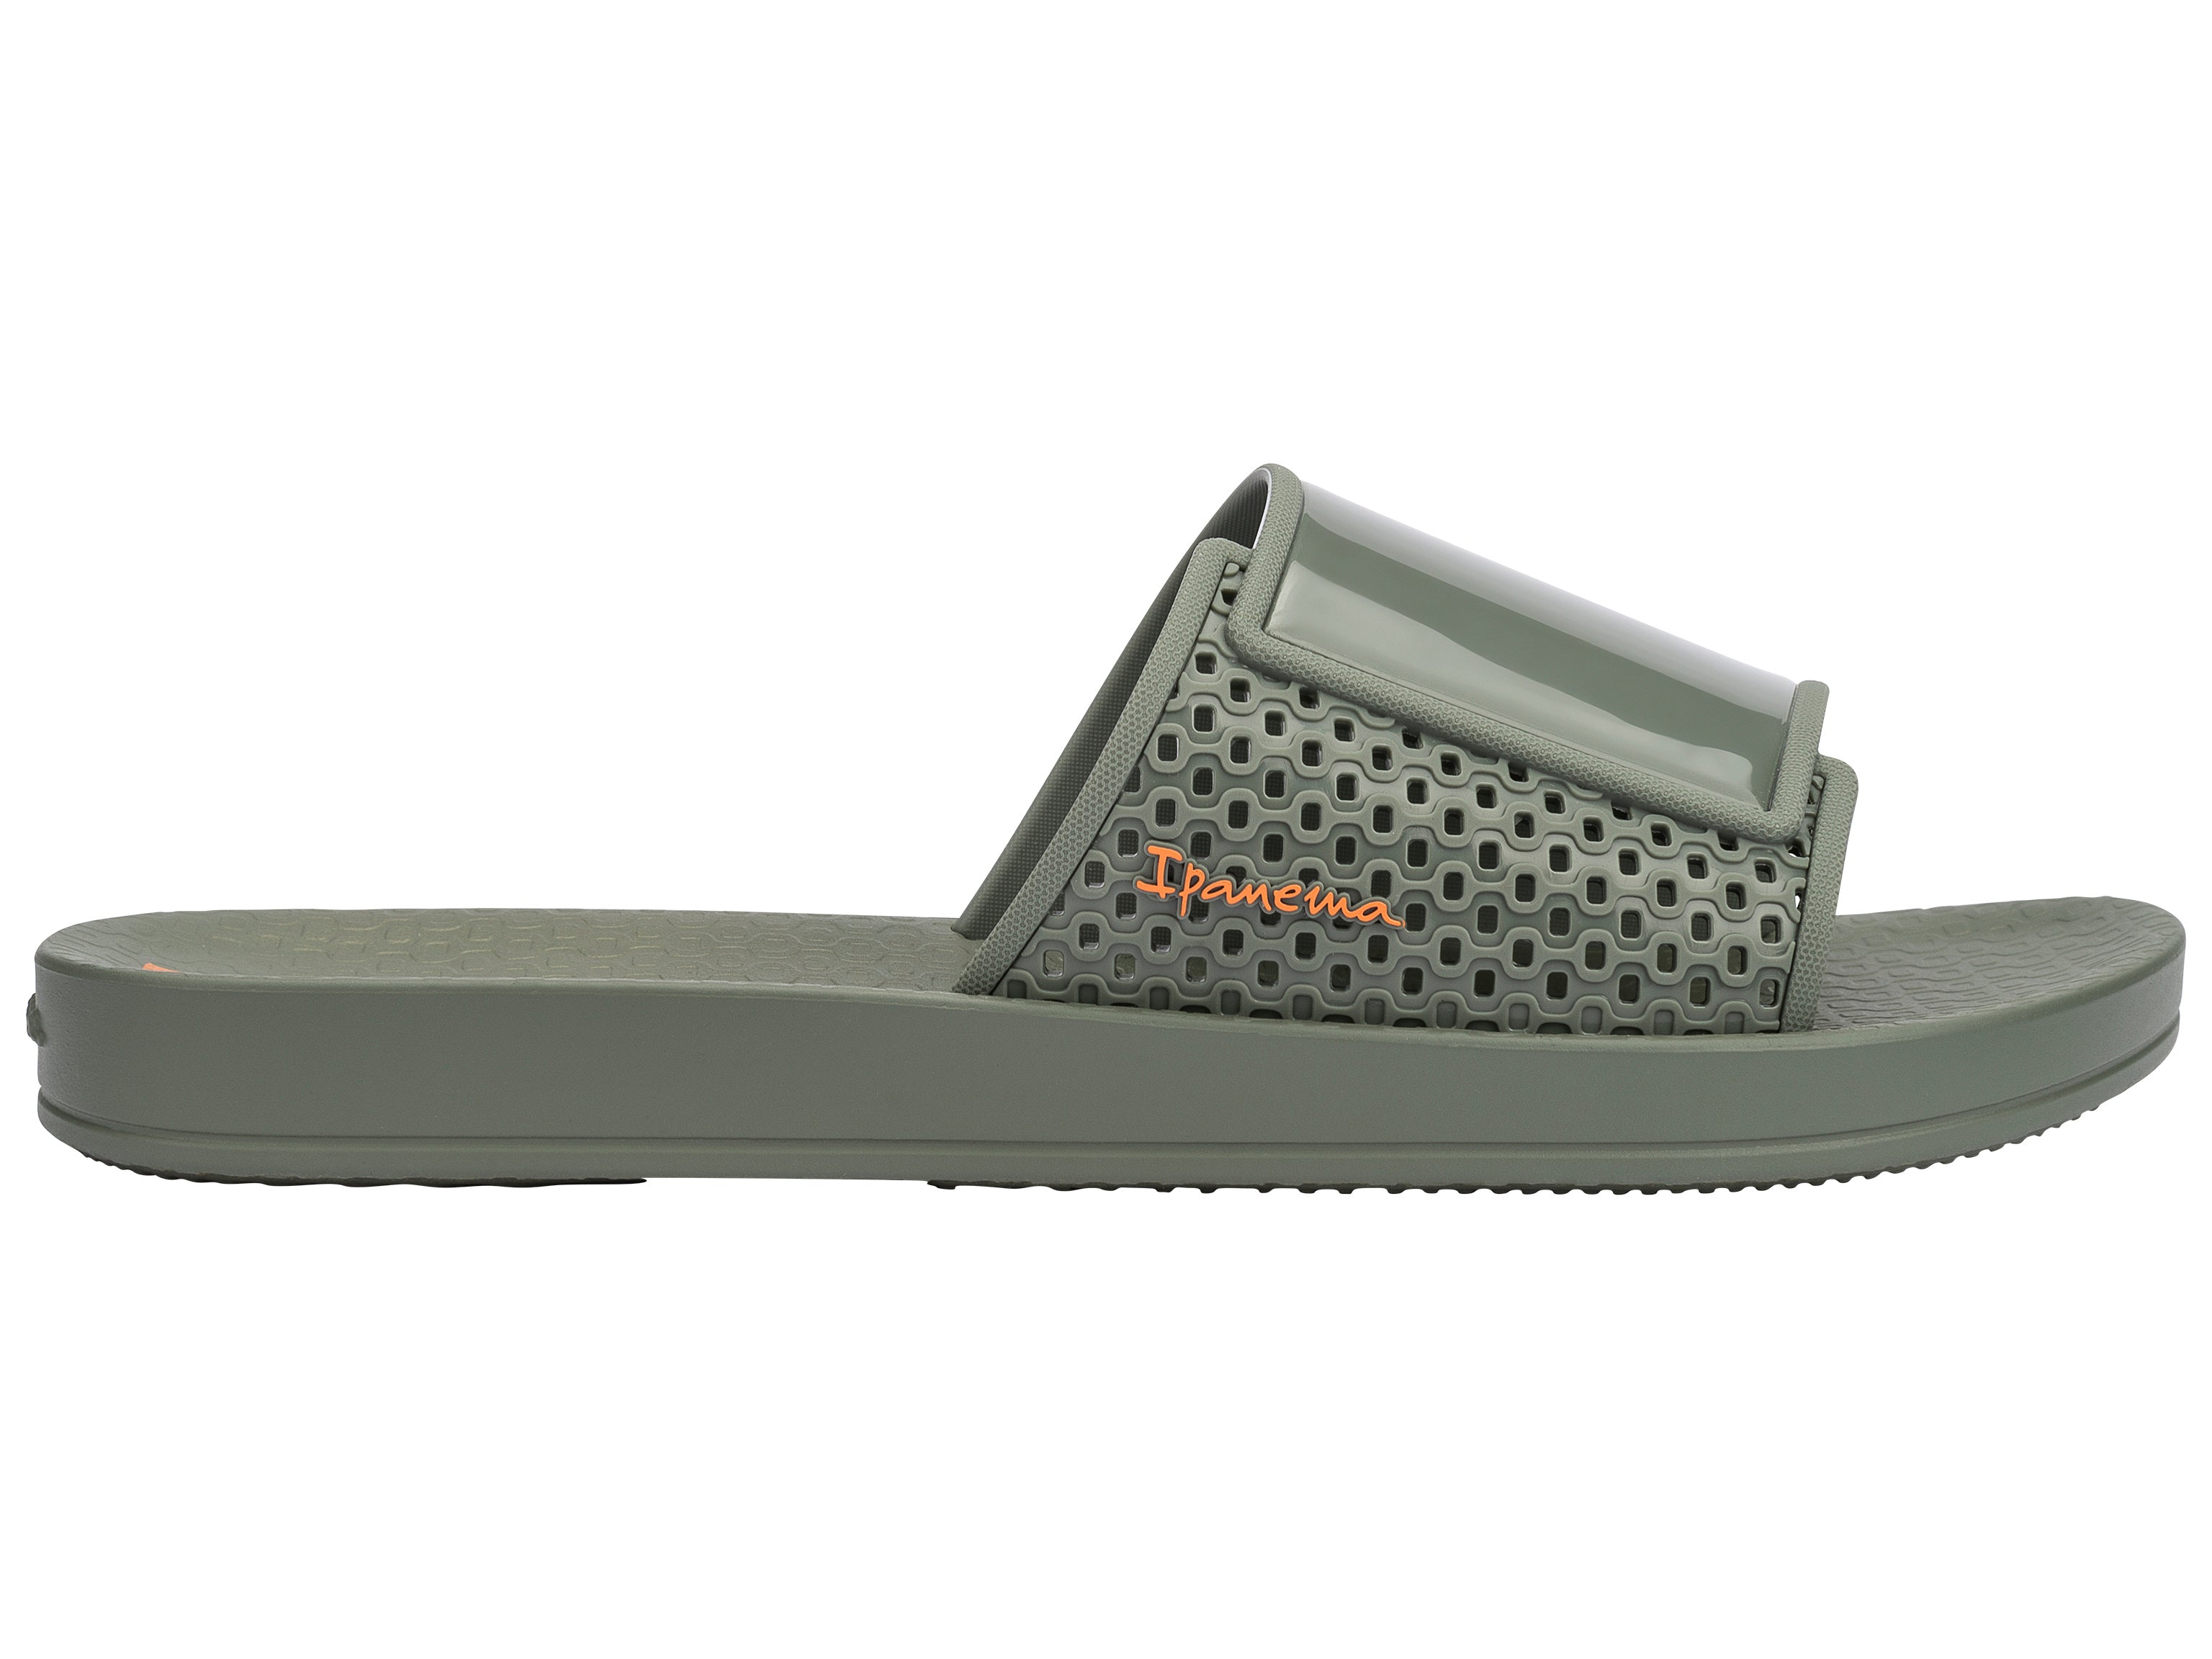 Outer side view of a green Ipanema Ana Urban women's slide.